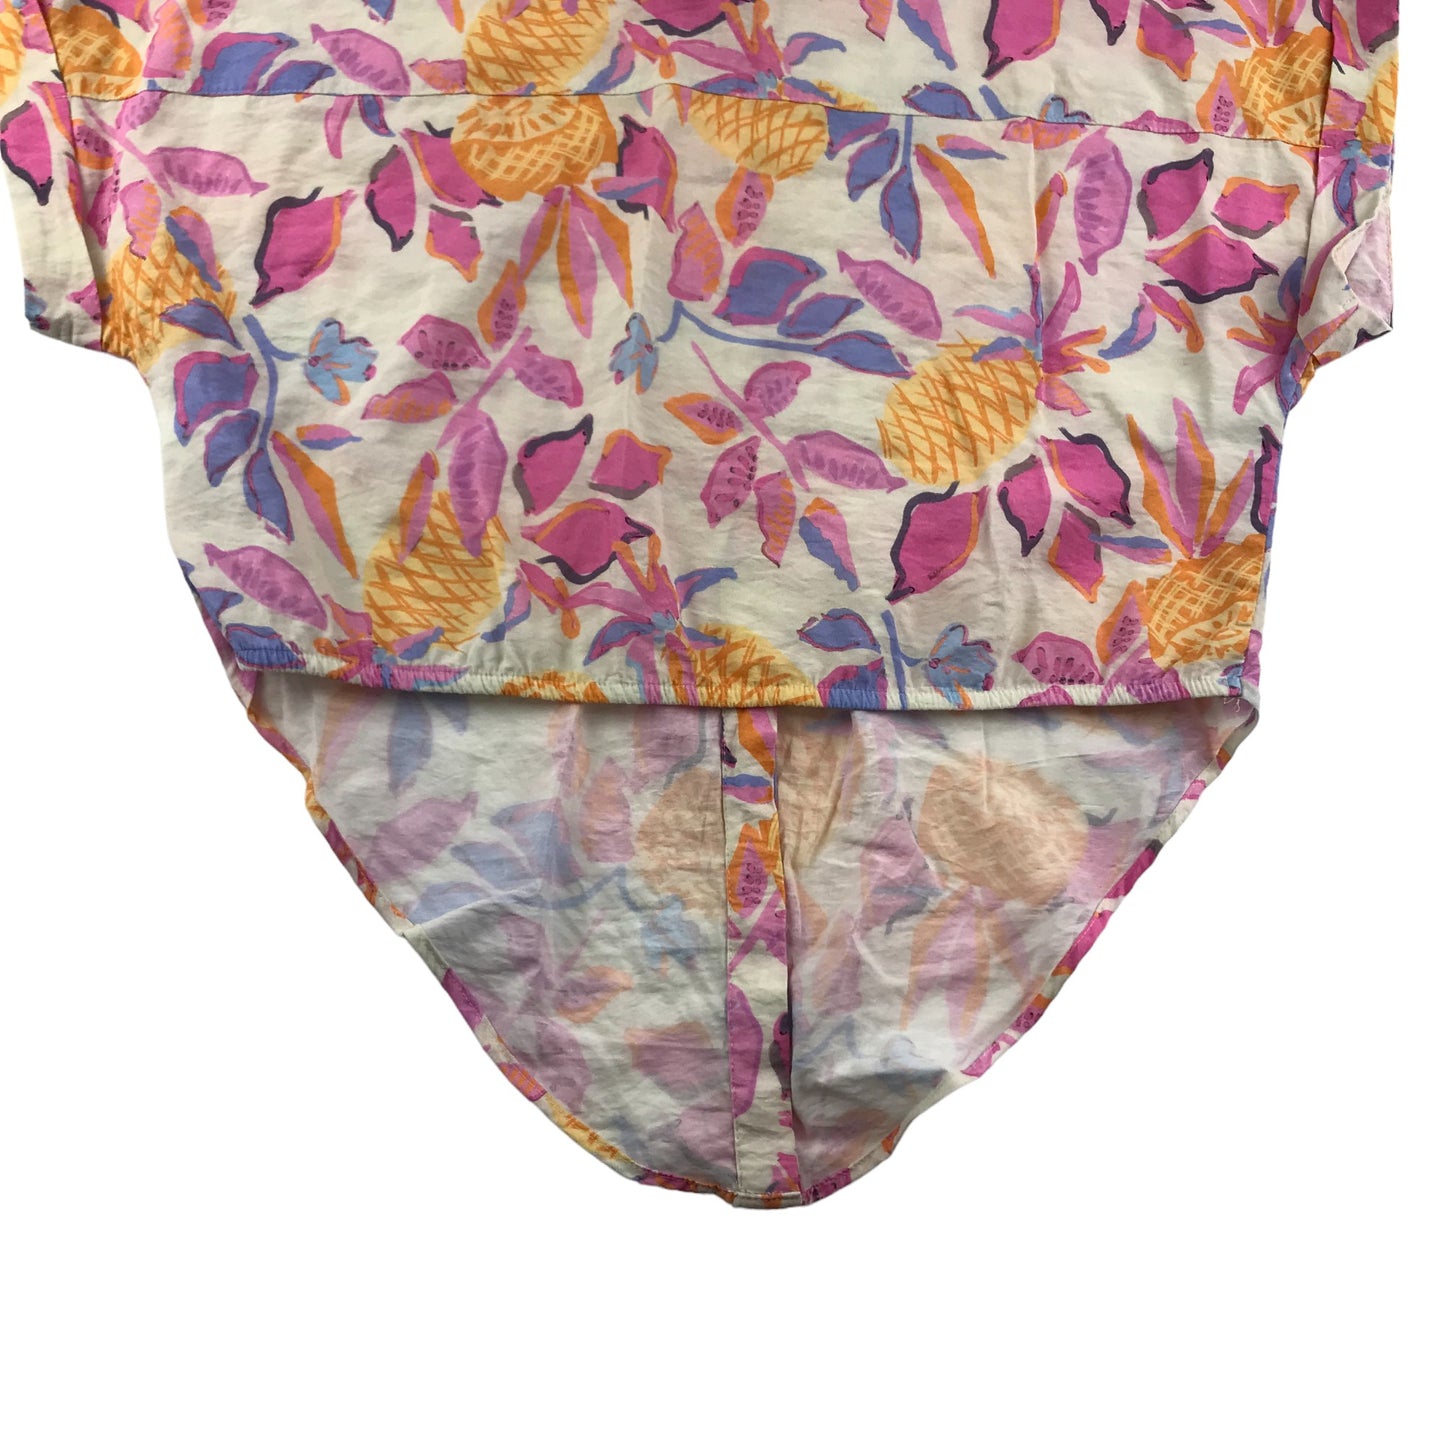 Zara Blouse Age 13 Pink Yellow Blue and White Floral Cropped Button Up Shirt